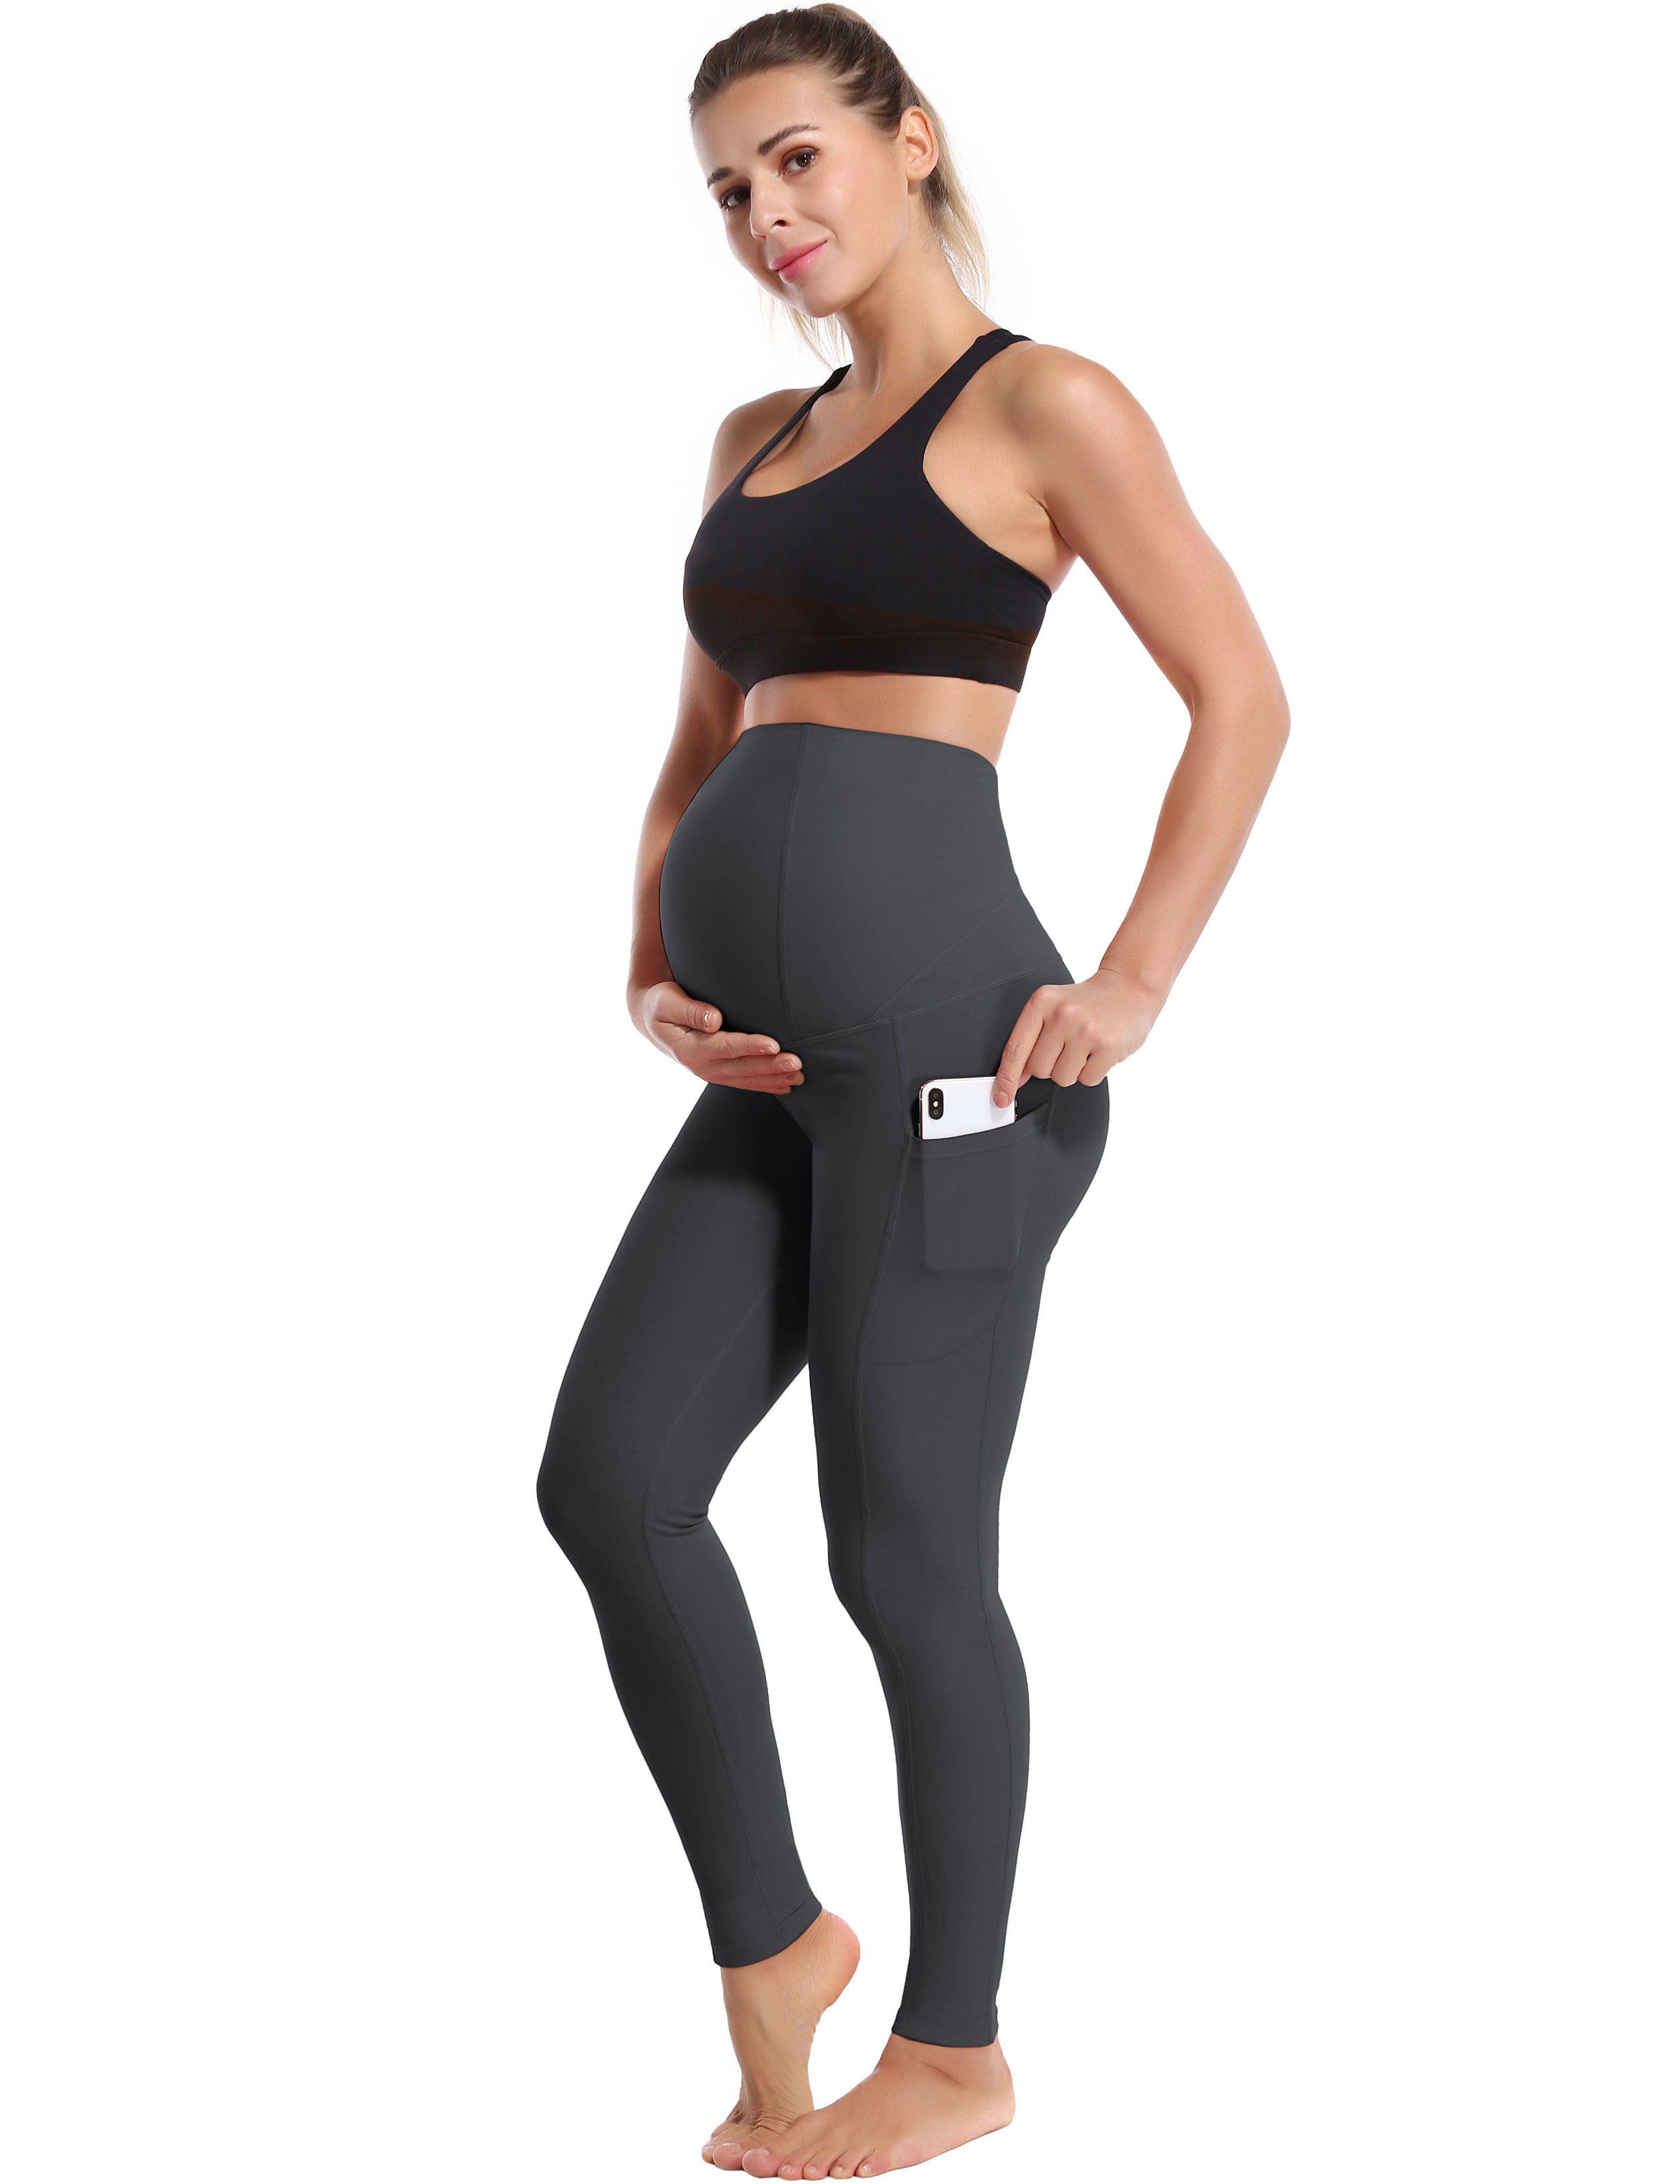 26" Side Pockets Maternity Yoga Pants shadowcharcoal 87%Nylon/13%Spandex Softest-ever fabric High elasticity 4-way stretch Fabric doesn't attract lint easily No see-through Moisture-wicking Machine wash